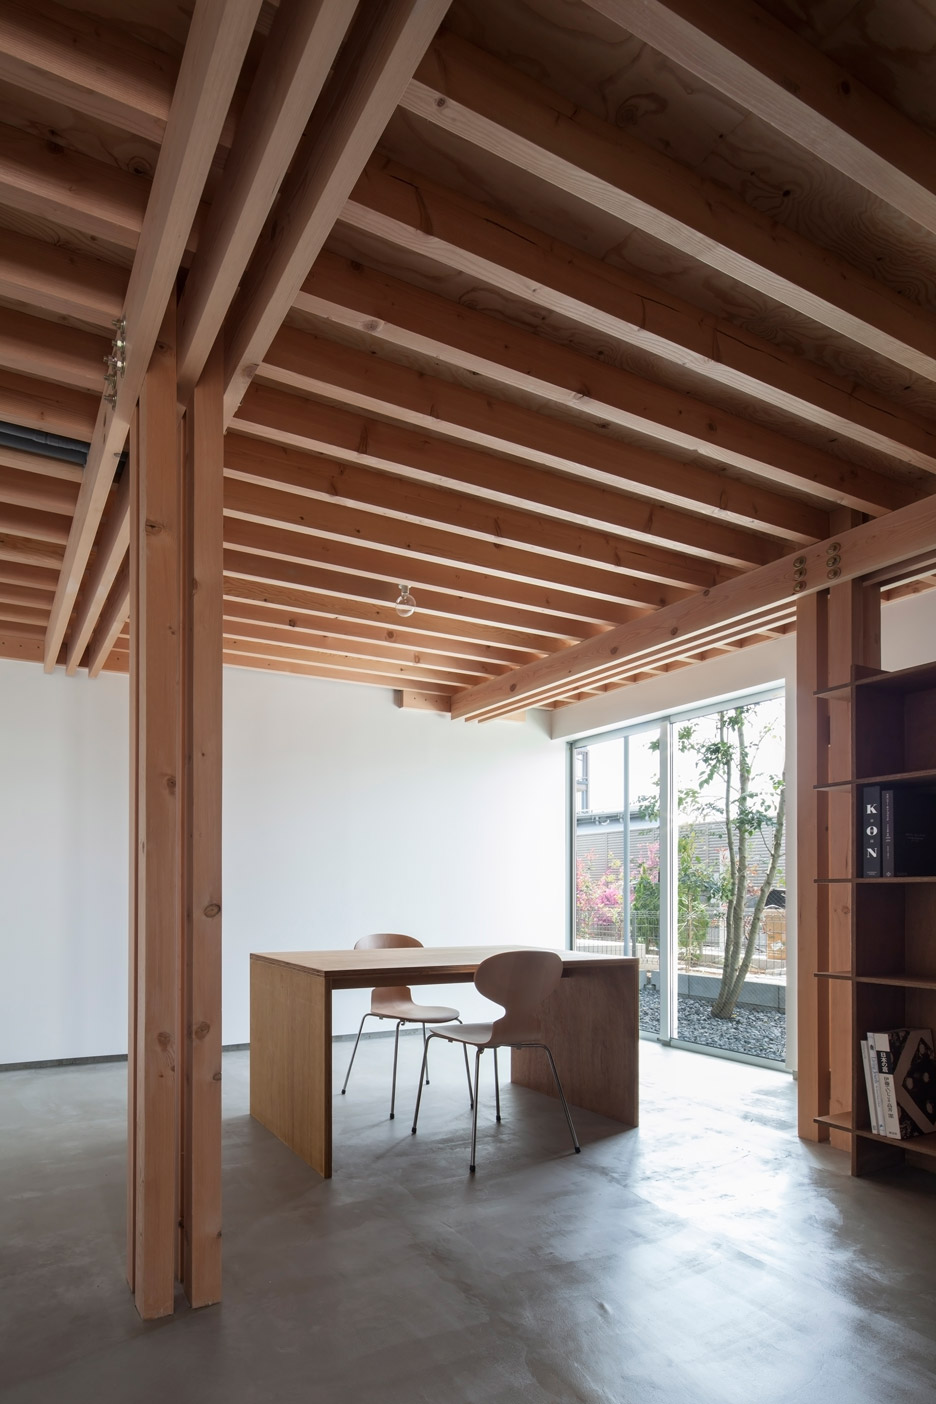 FT Architects’ 4 Columns House Features A Traditional Timber Frame And Minimal Interior